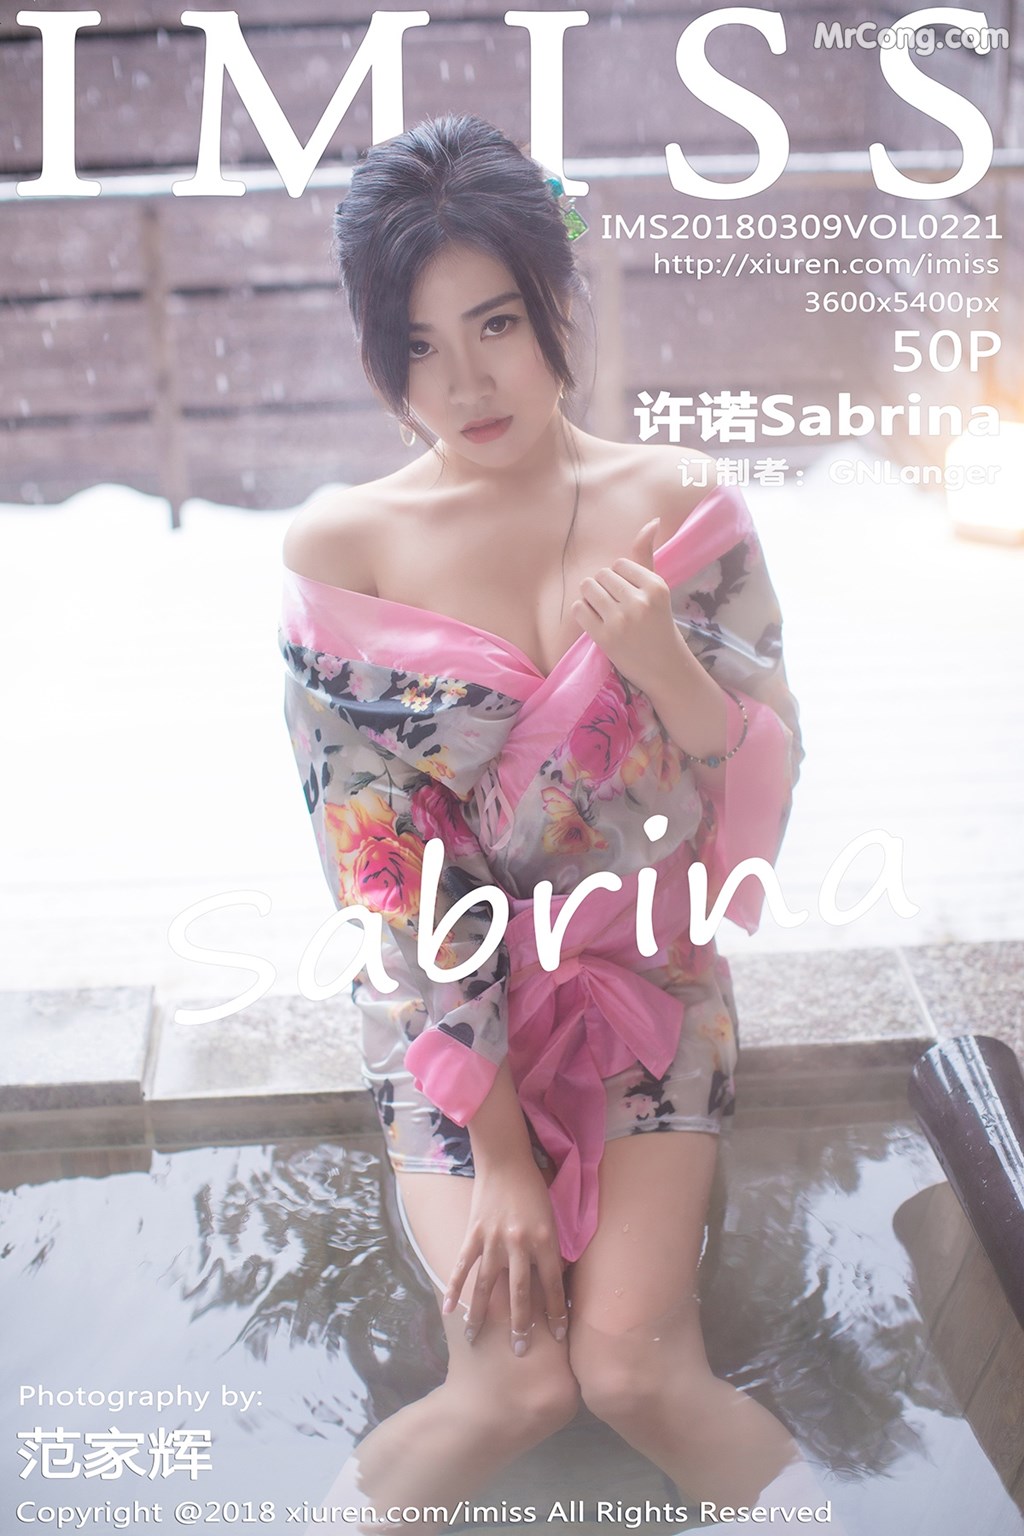 IMISS Vol. 2121: Model Sabrina (许诺) (51 pictures) photo 1-0